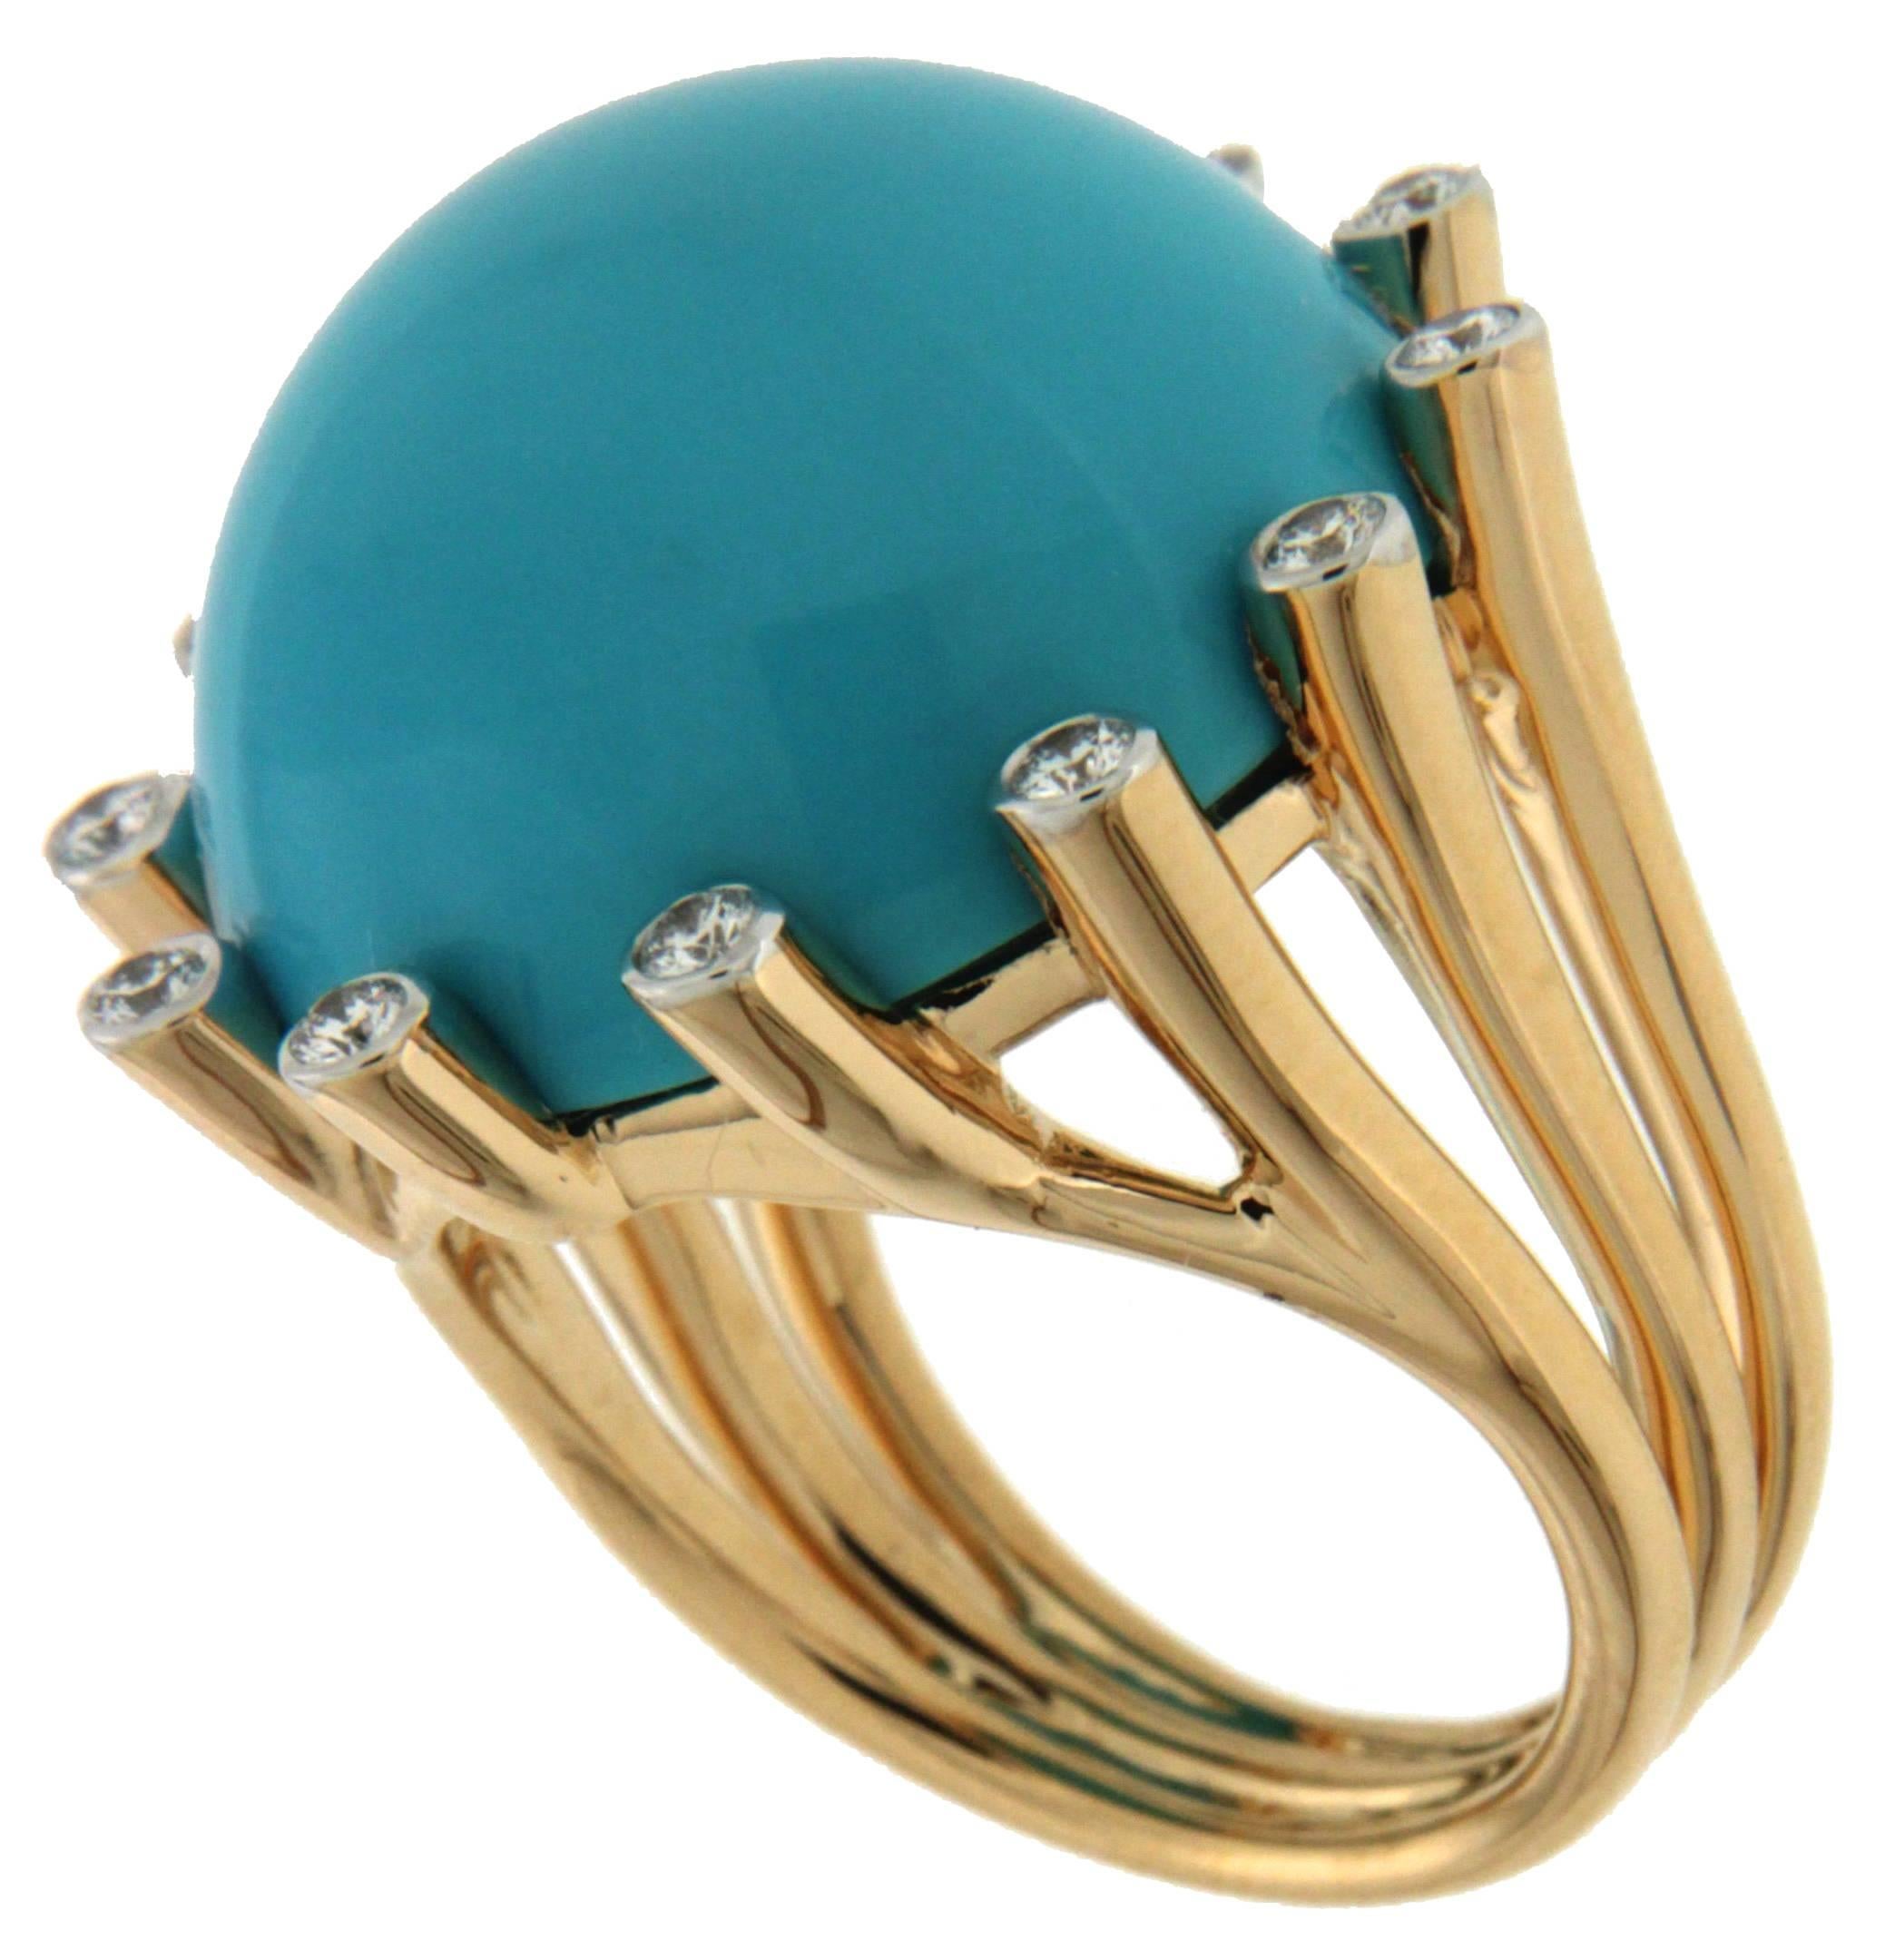 This La Luna ring features a 22 mm round Turquoise Cabochon surrounded by 12 round brilliant diamonds. This ring is finished in 18kt Yellow Gold.